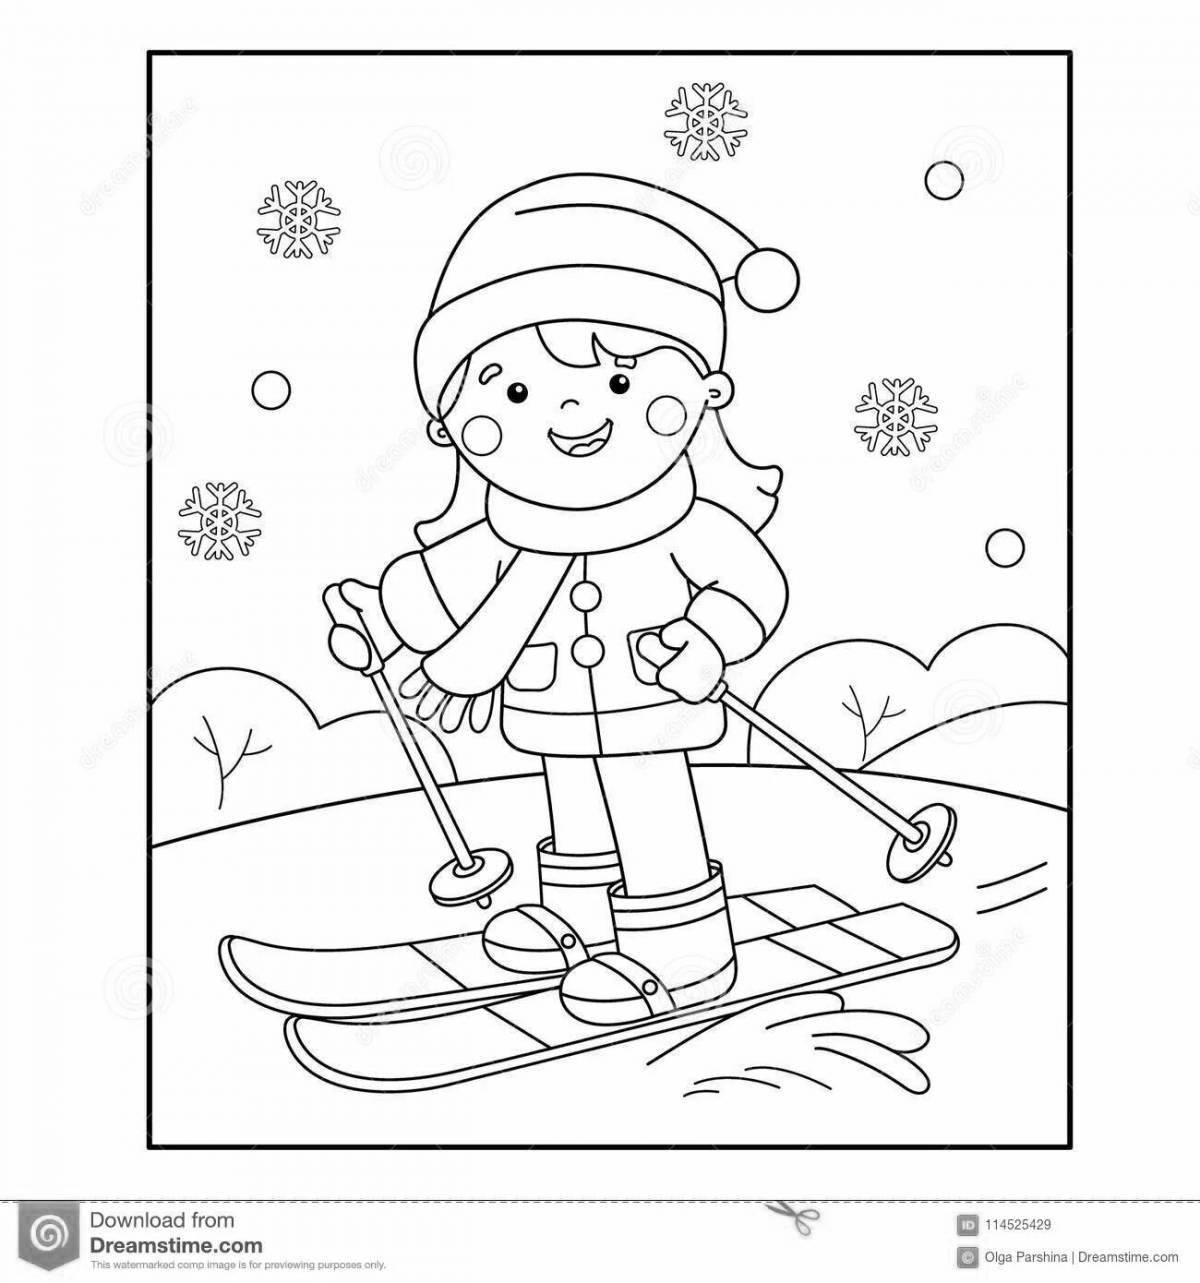 Coloring page playful boy skiing